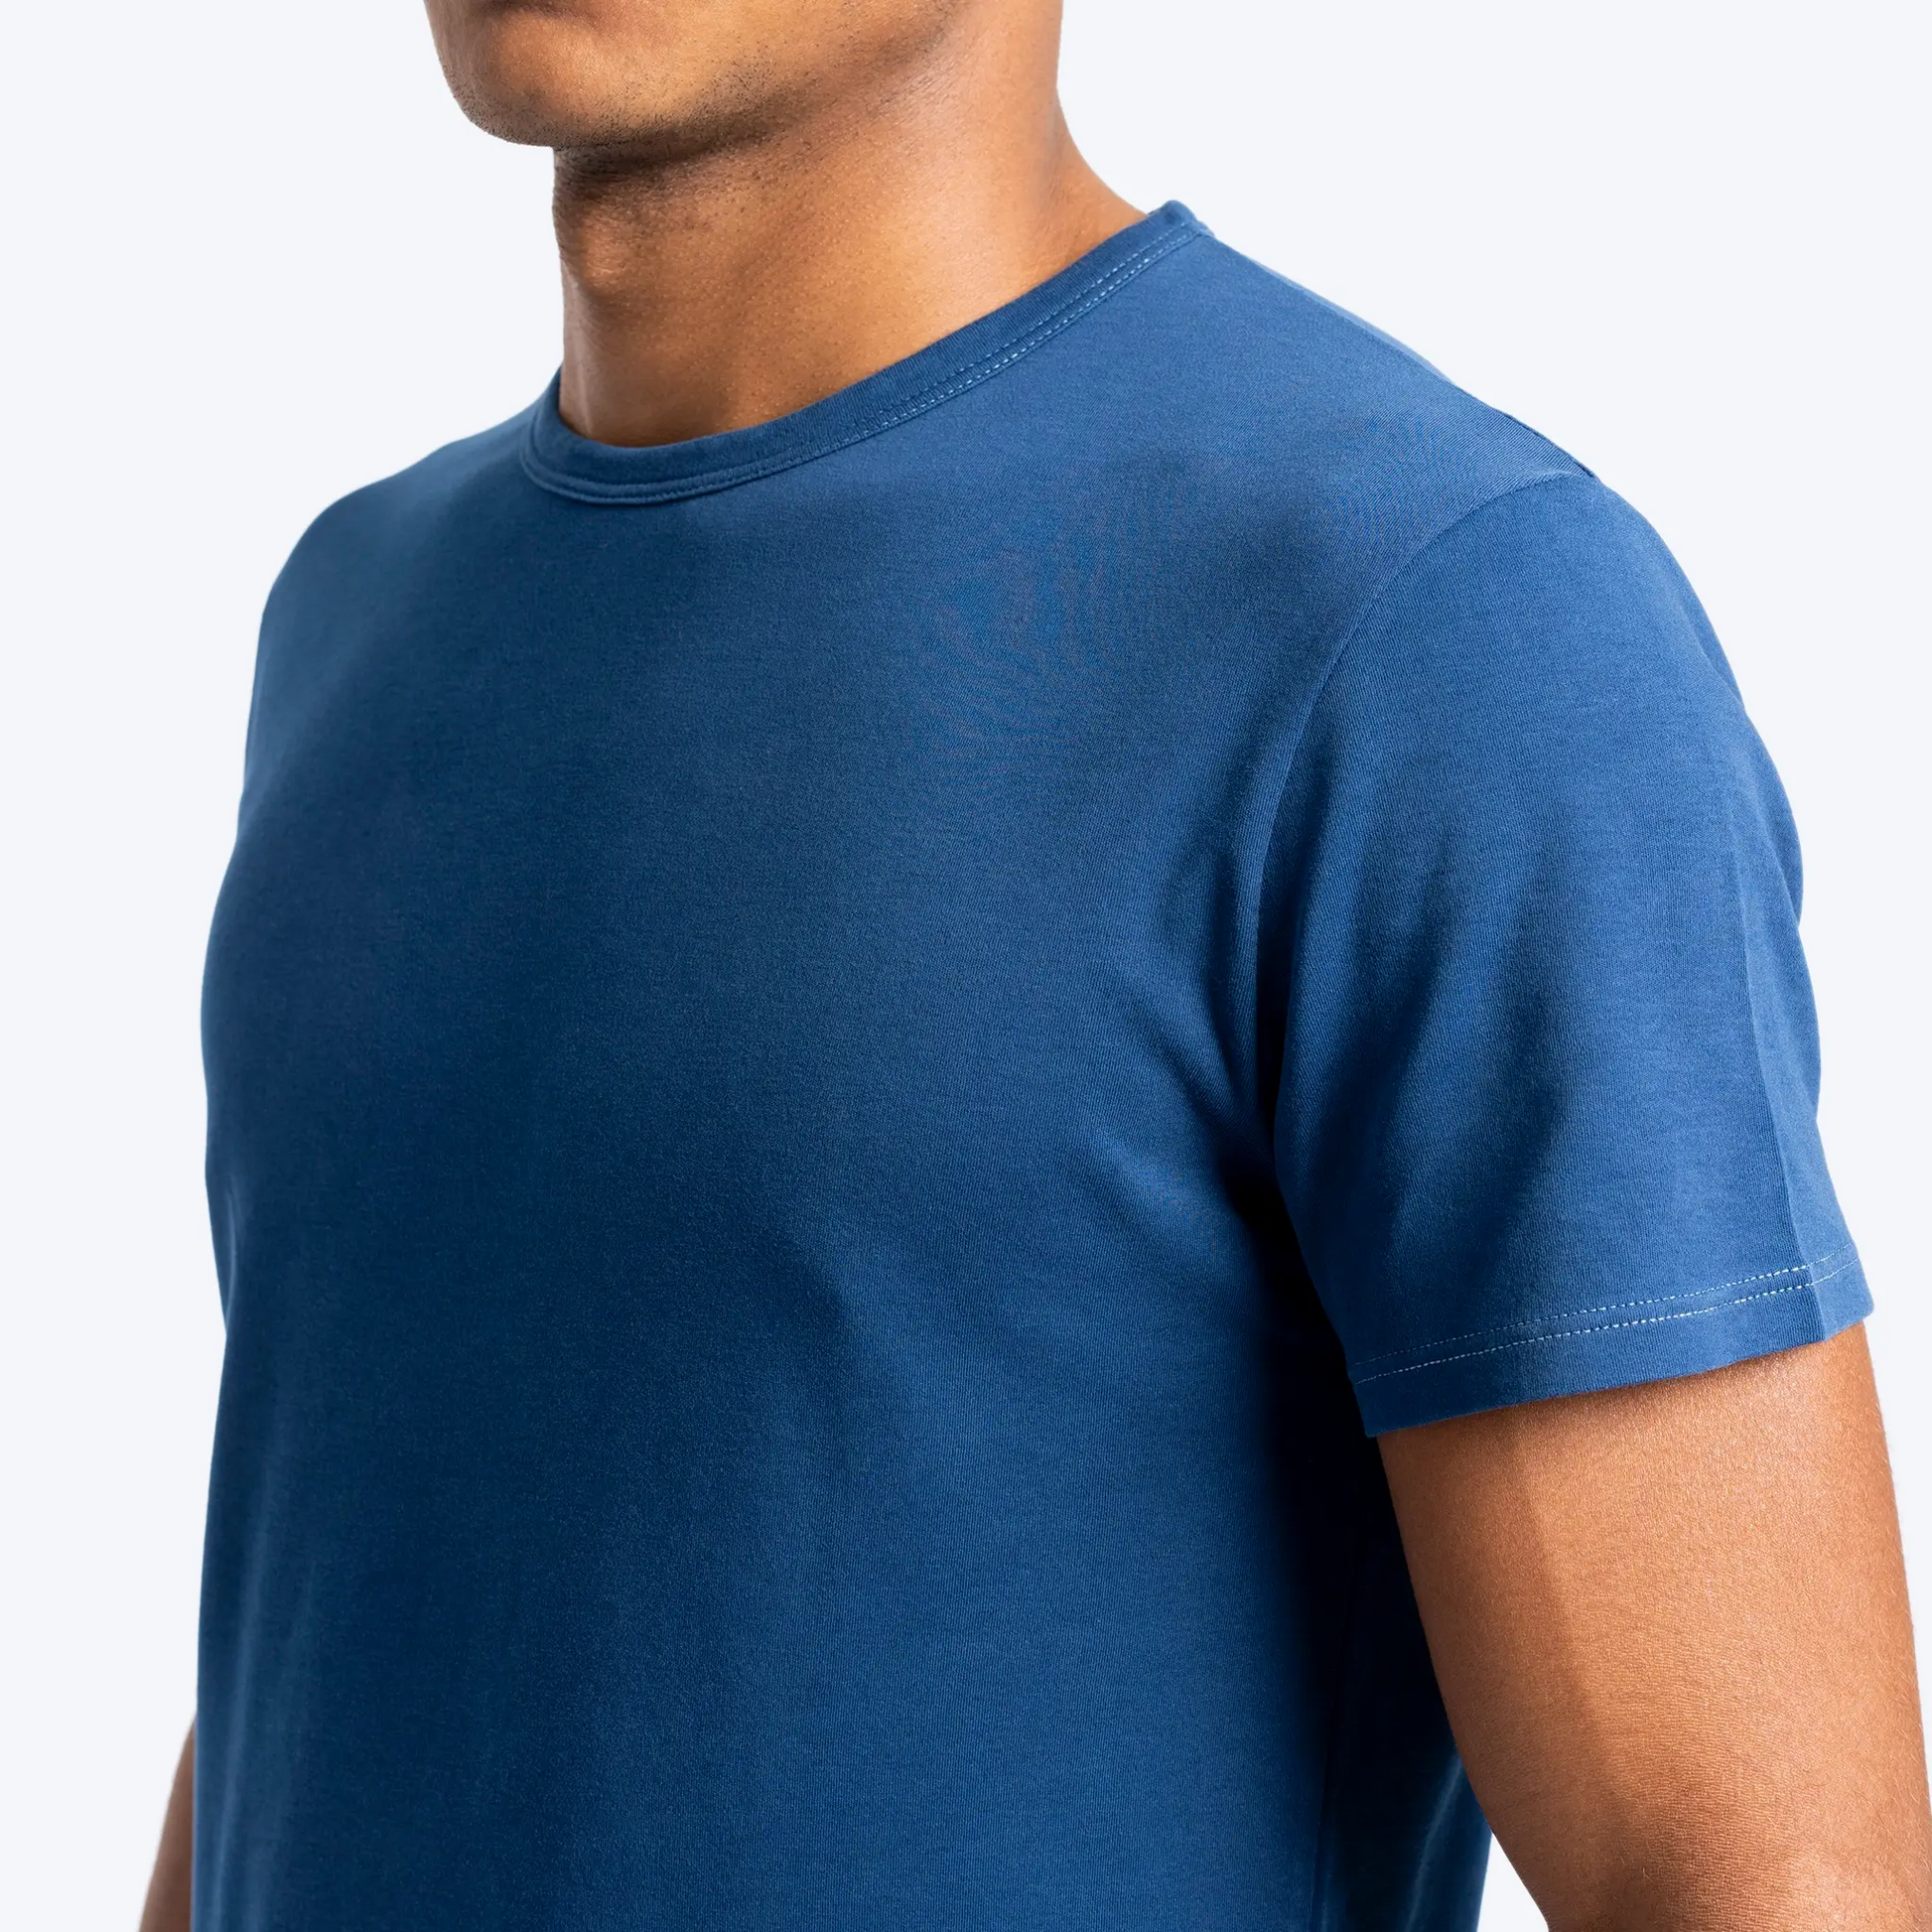 Men's Lounging Pack 2x T-Shirts & Arms of Andes Sweatpants 